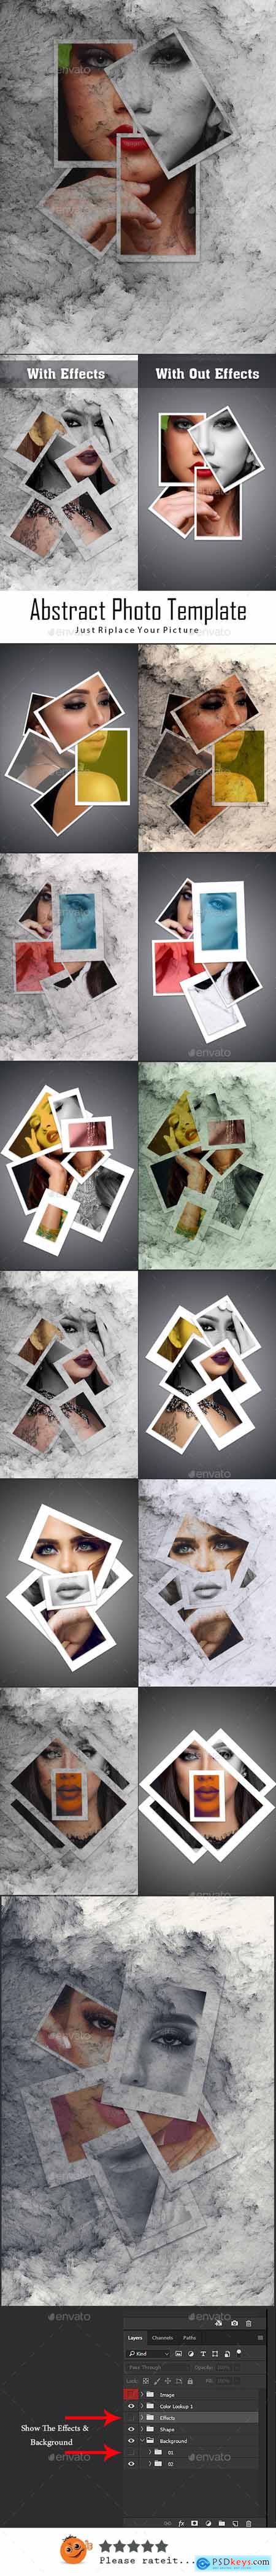 Abstract Photo Template